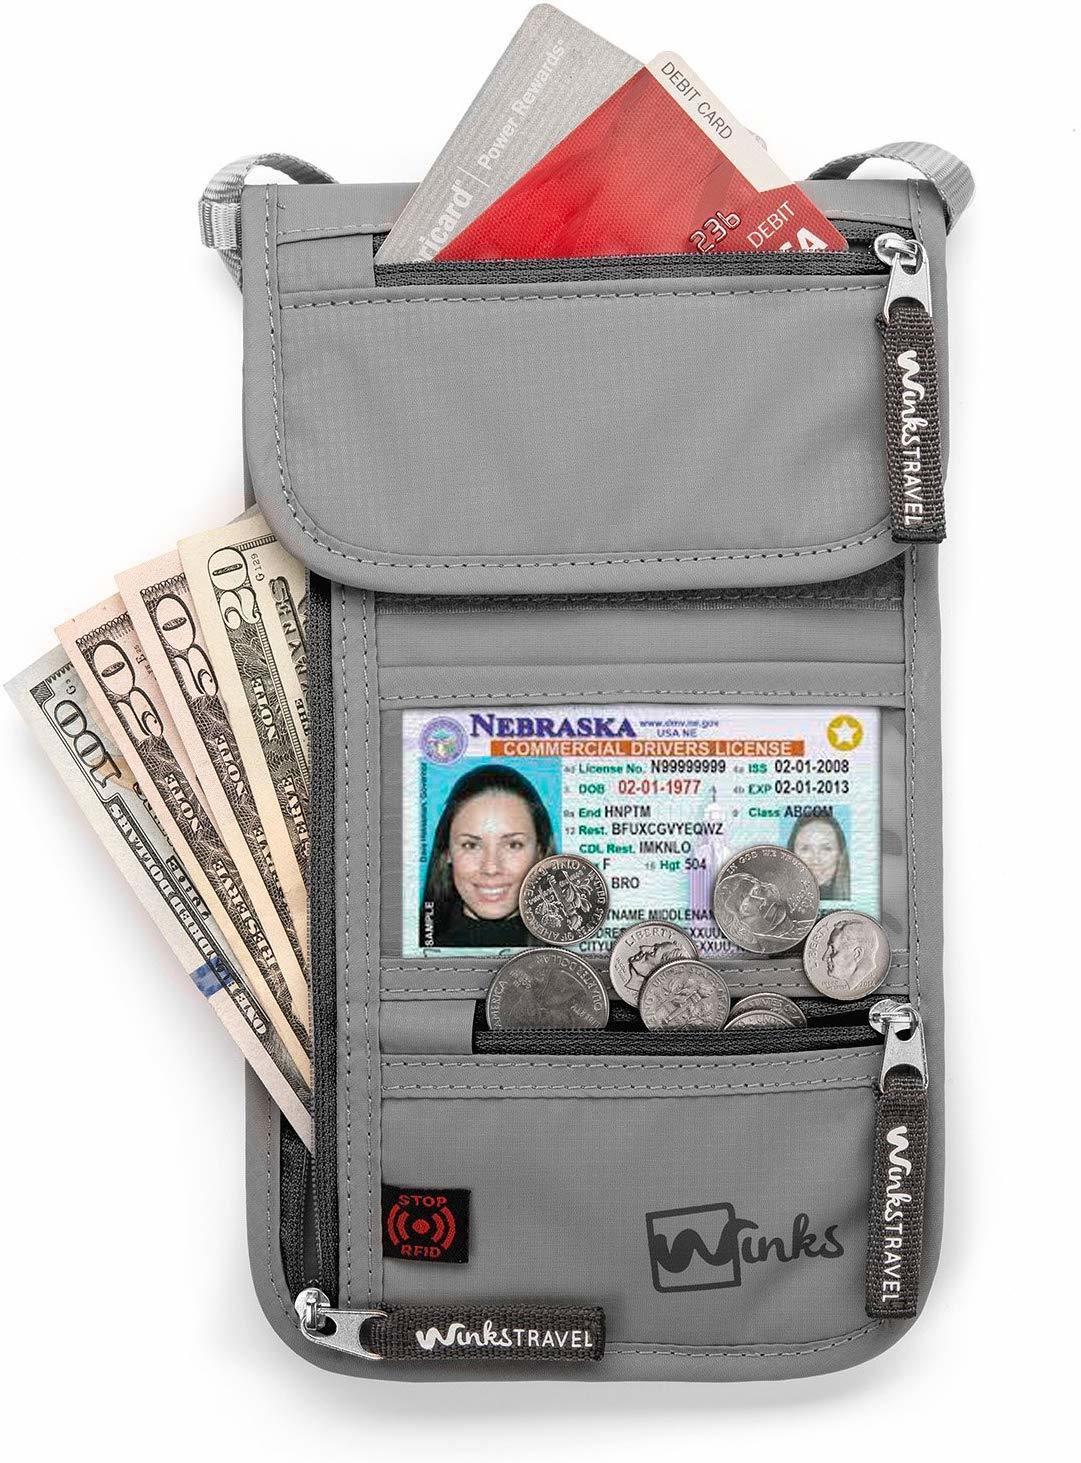 8 Travel Wallets You Can Use While on Your Journey 2